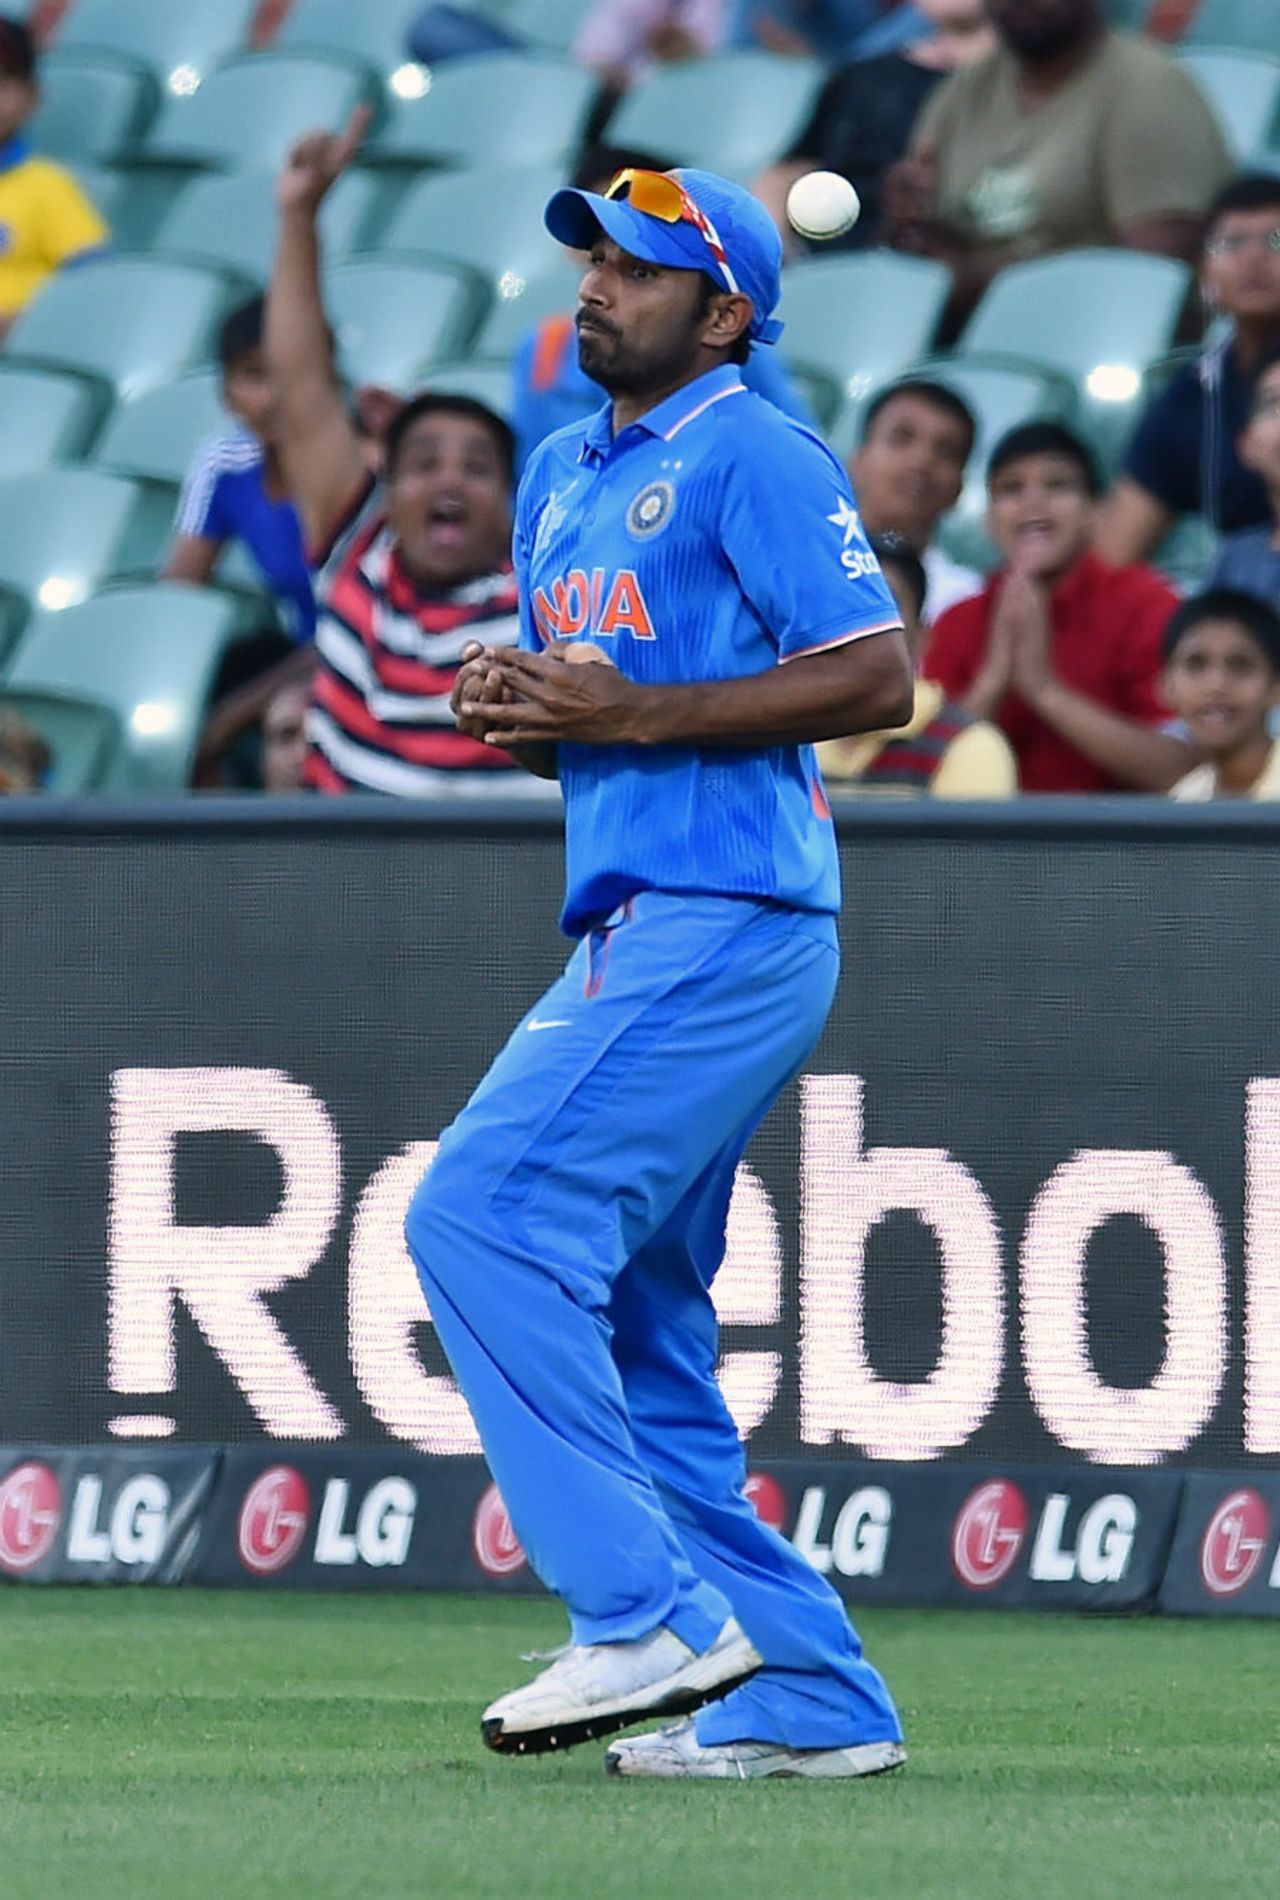 Mohammed Shami drops a catch at the long-on boundary, Afghanistan v India, World Cup warm-ups, Adelaide, February 10, 2015